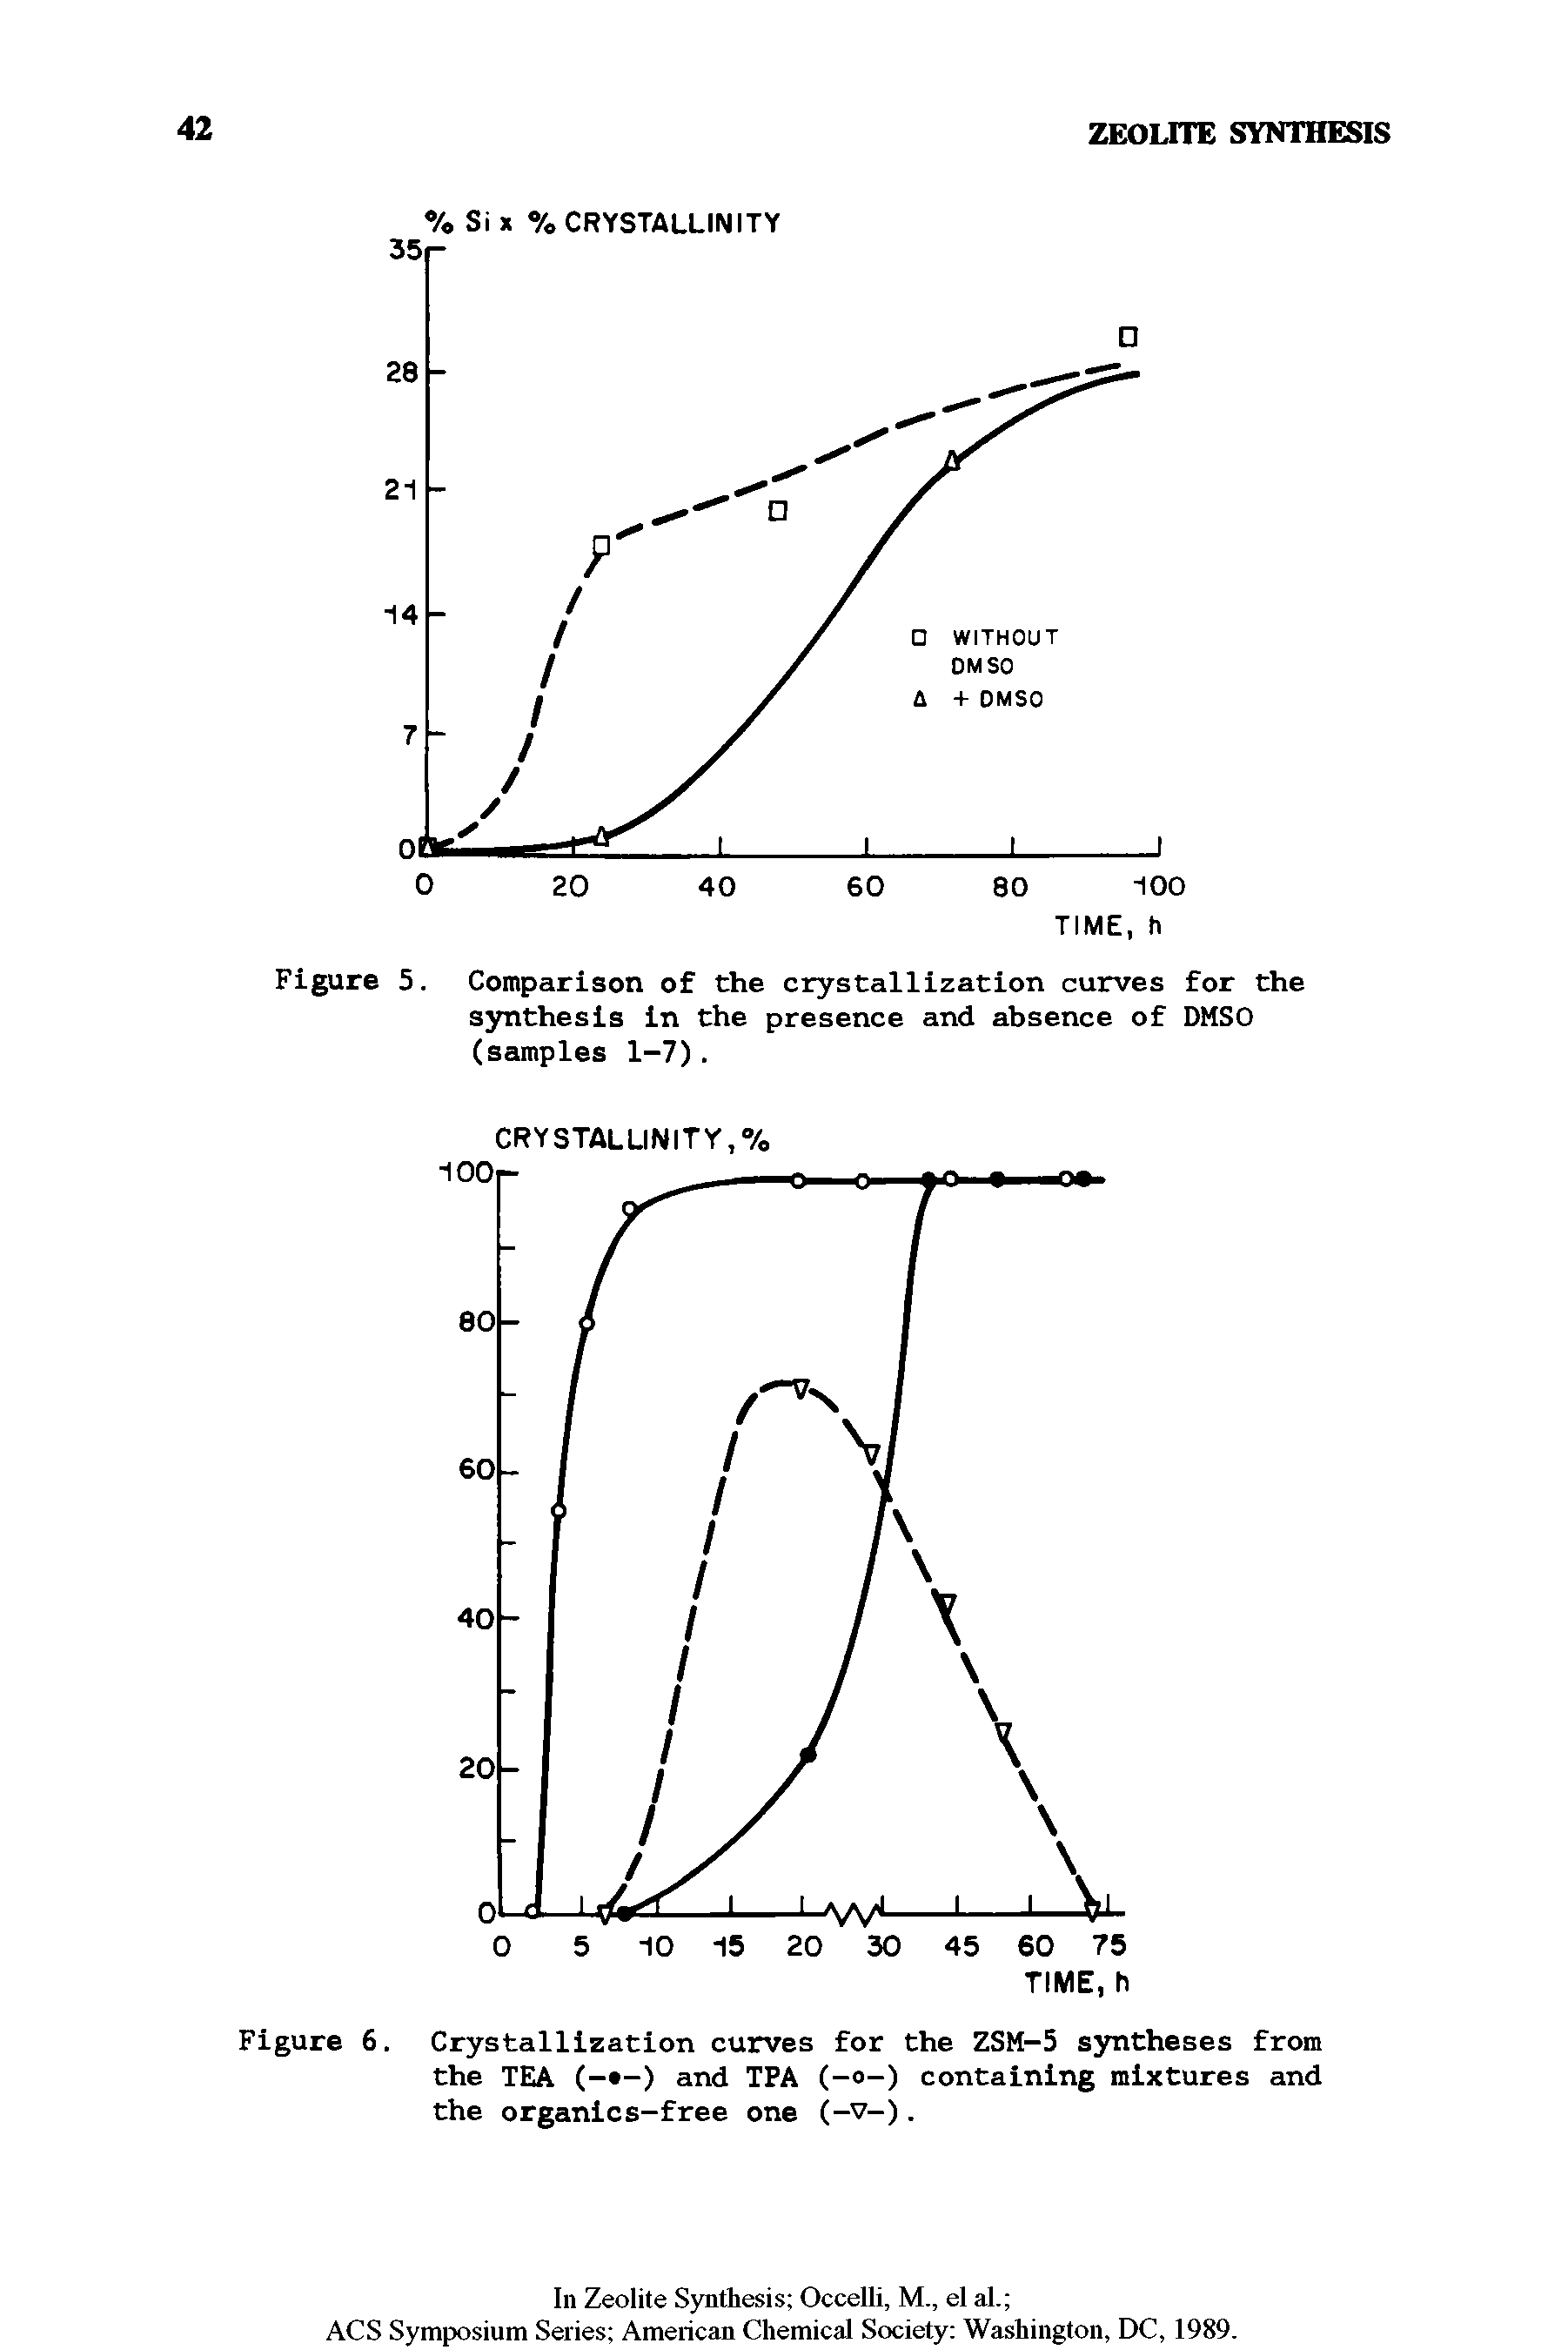 Figure 5. Comparison of the crystallization curves for the synthesis in the presence and absence of DMSO (samples 1-7).